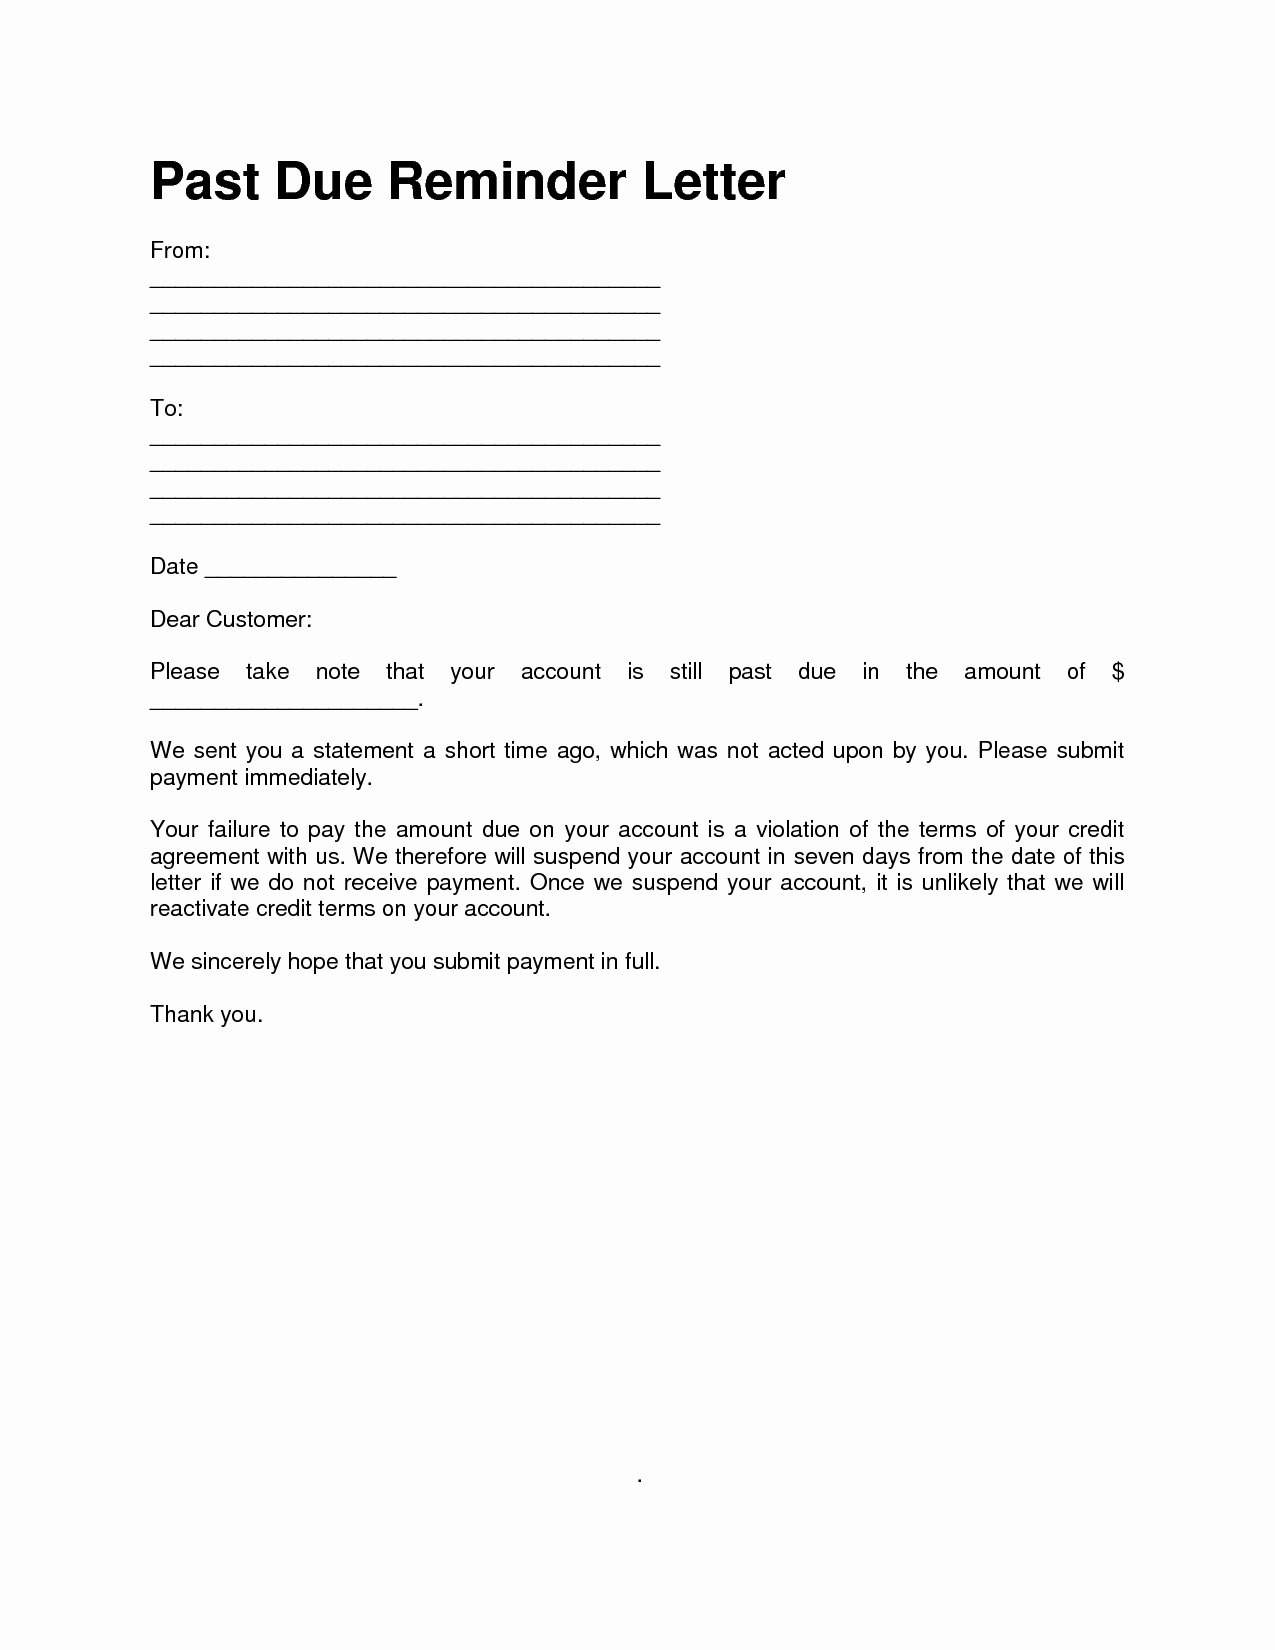 Friendly Collection Letter Sample Best Of Best S Of Past Due Letters to Customers Friendly